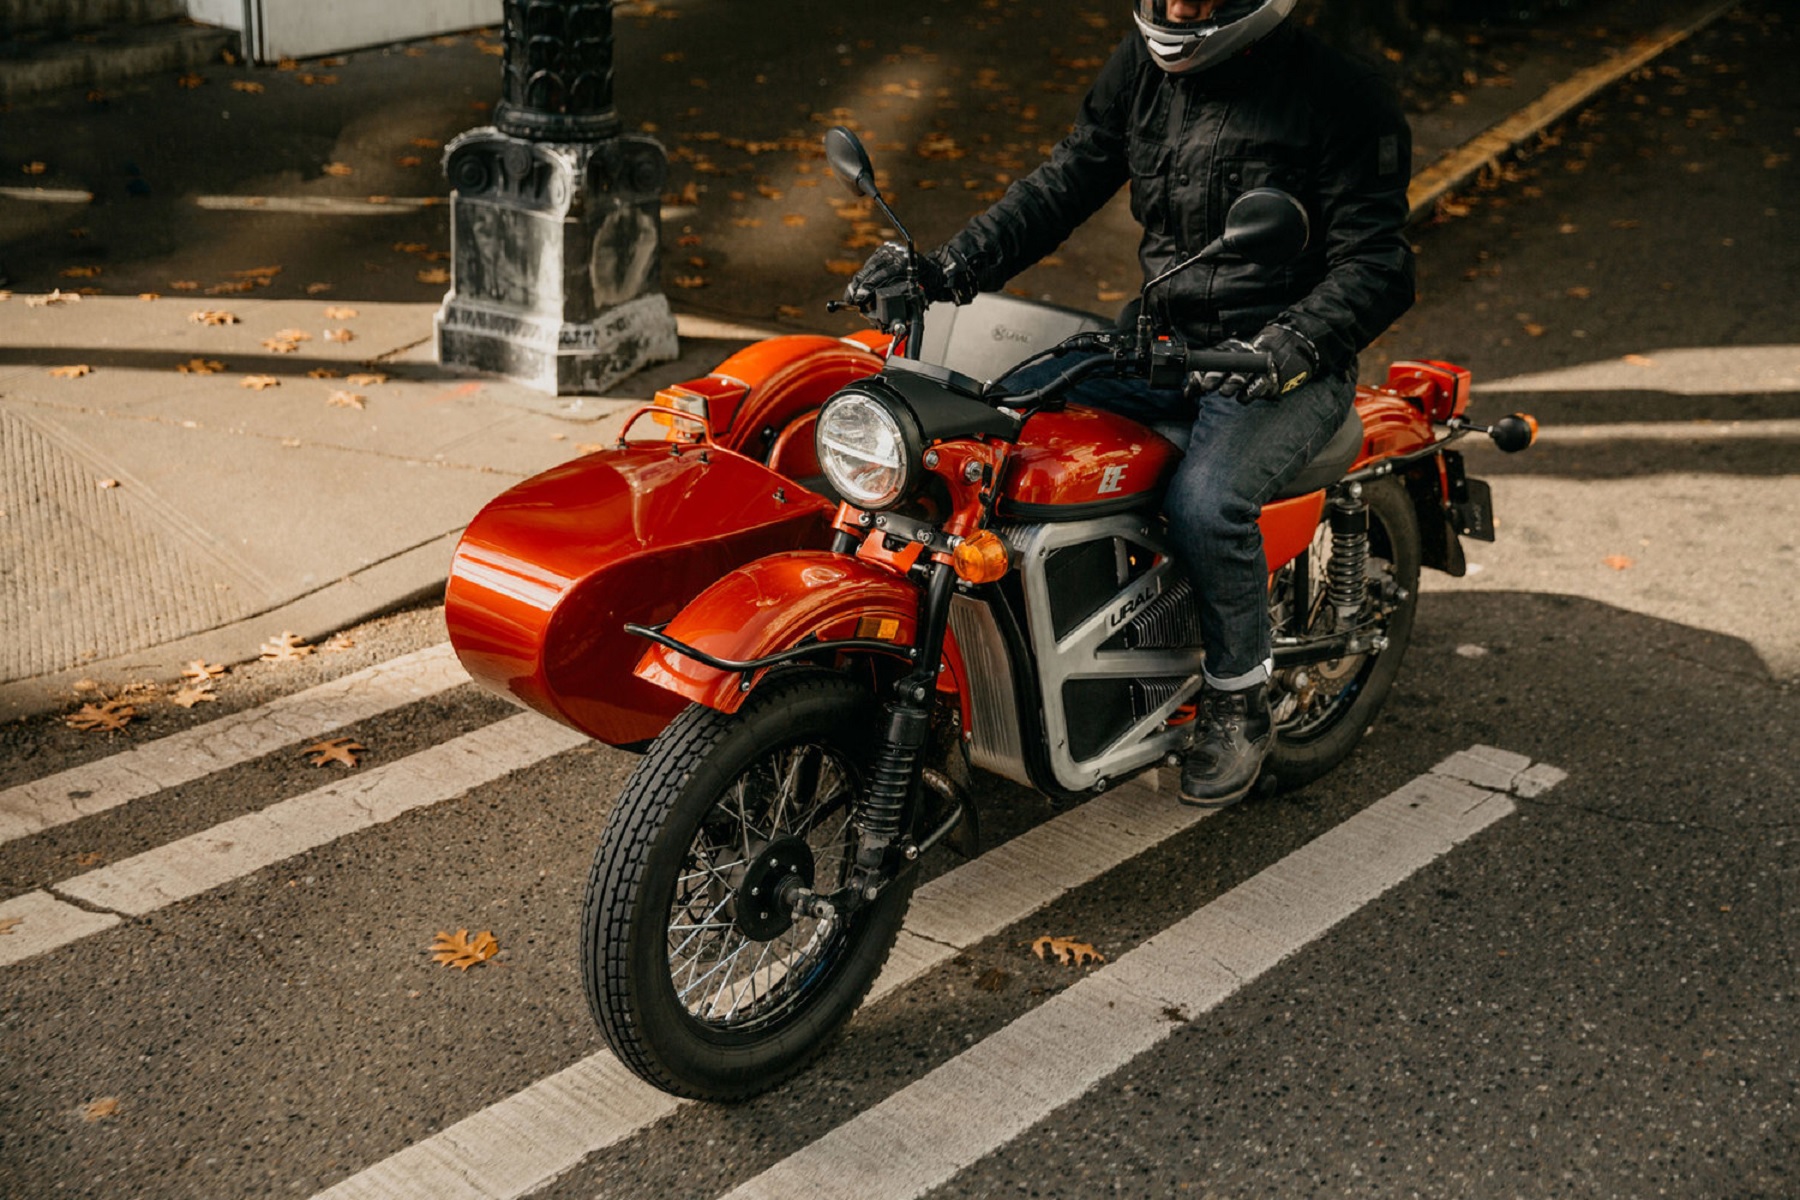 A rider on the orange Ural electric cT motorcycle concept with its sidecar on a city street